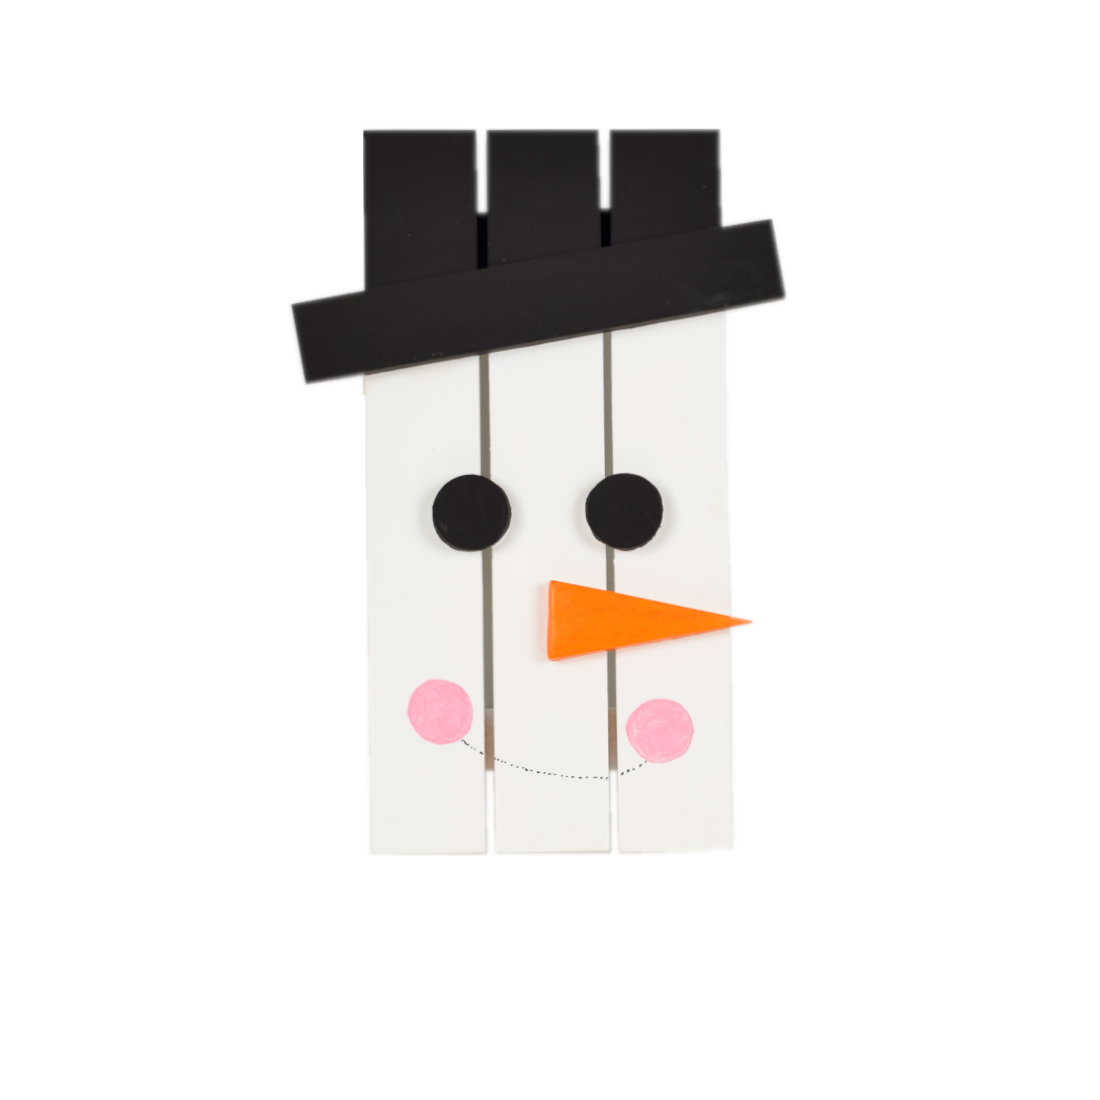 Frosty – Colorful Wooden Snowman - CustHum